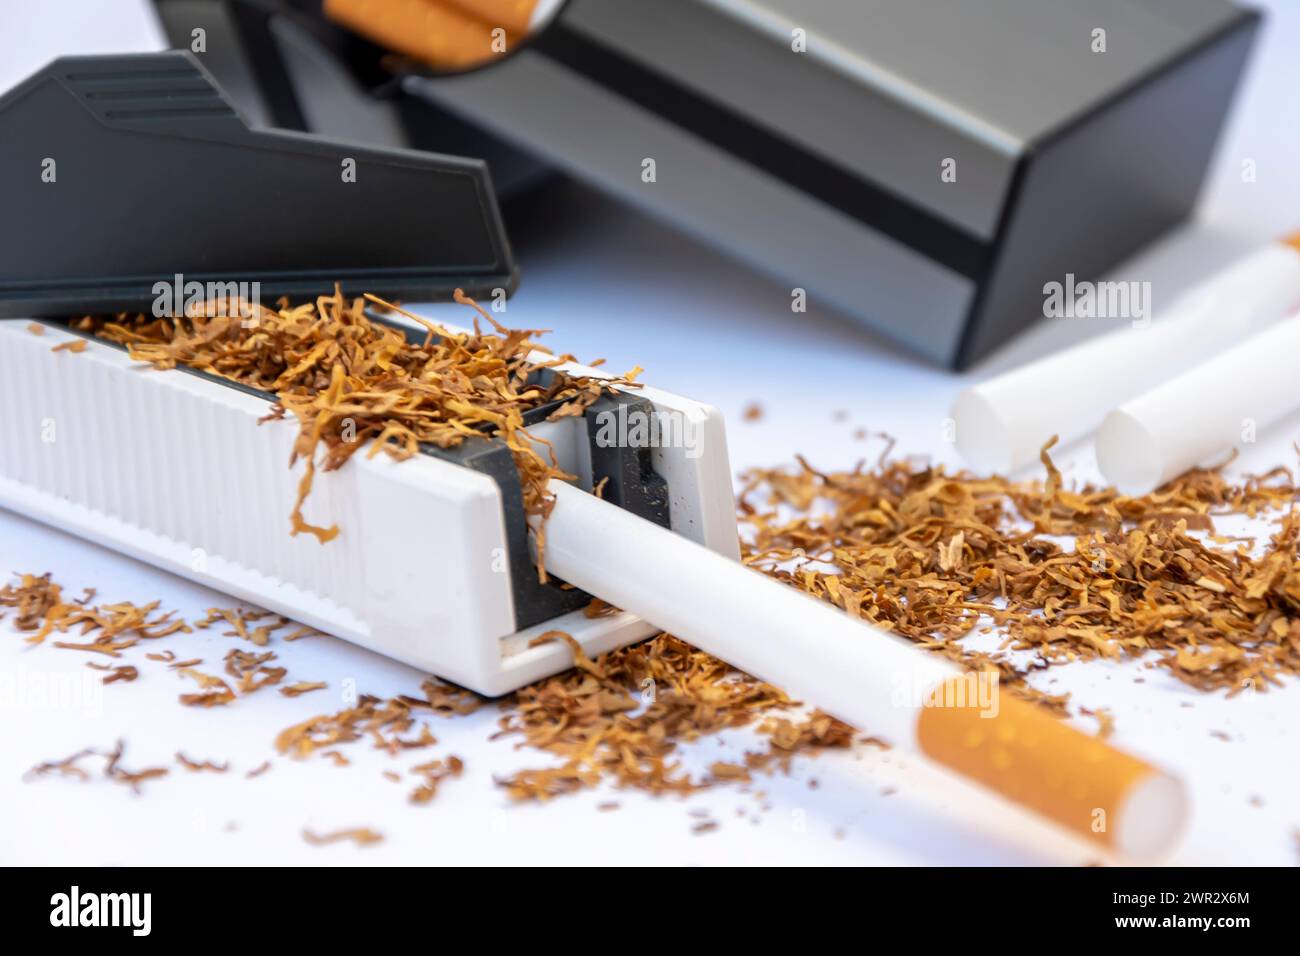 Manual machine for stuffing cigarette casings with tobacco, scattered empty cigarettes and a pile of tobacco on a white background, cigarette case wit Stock Photo